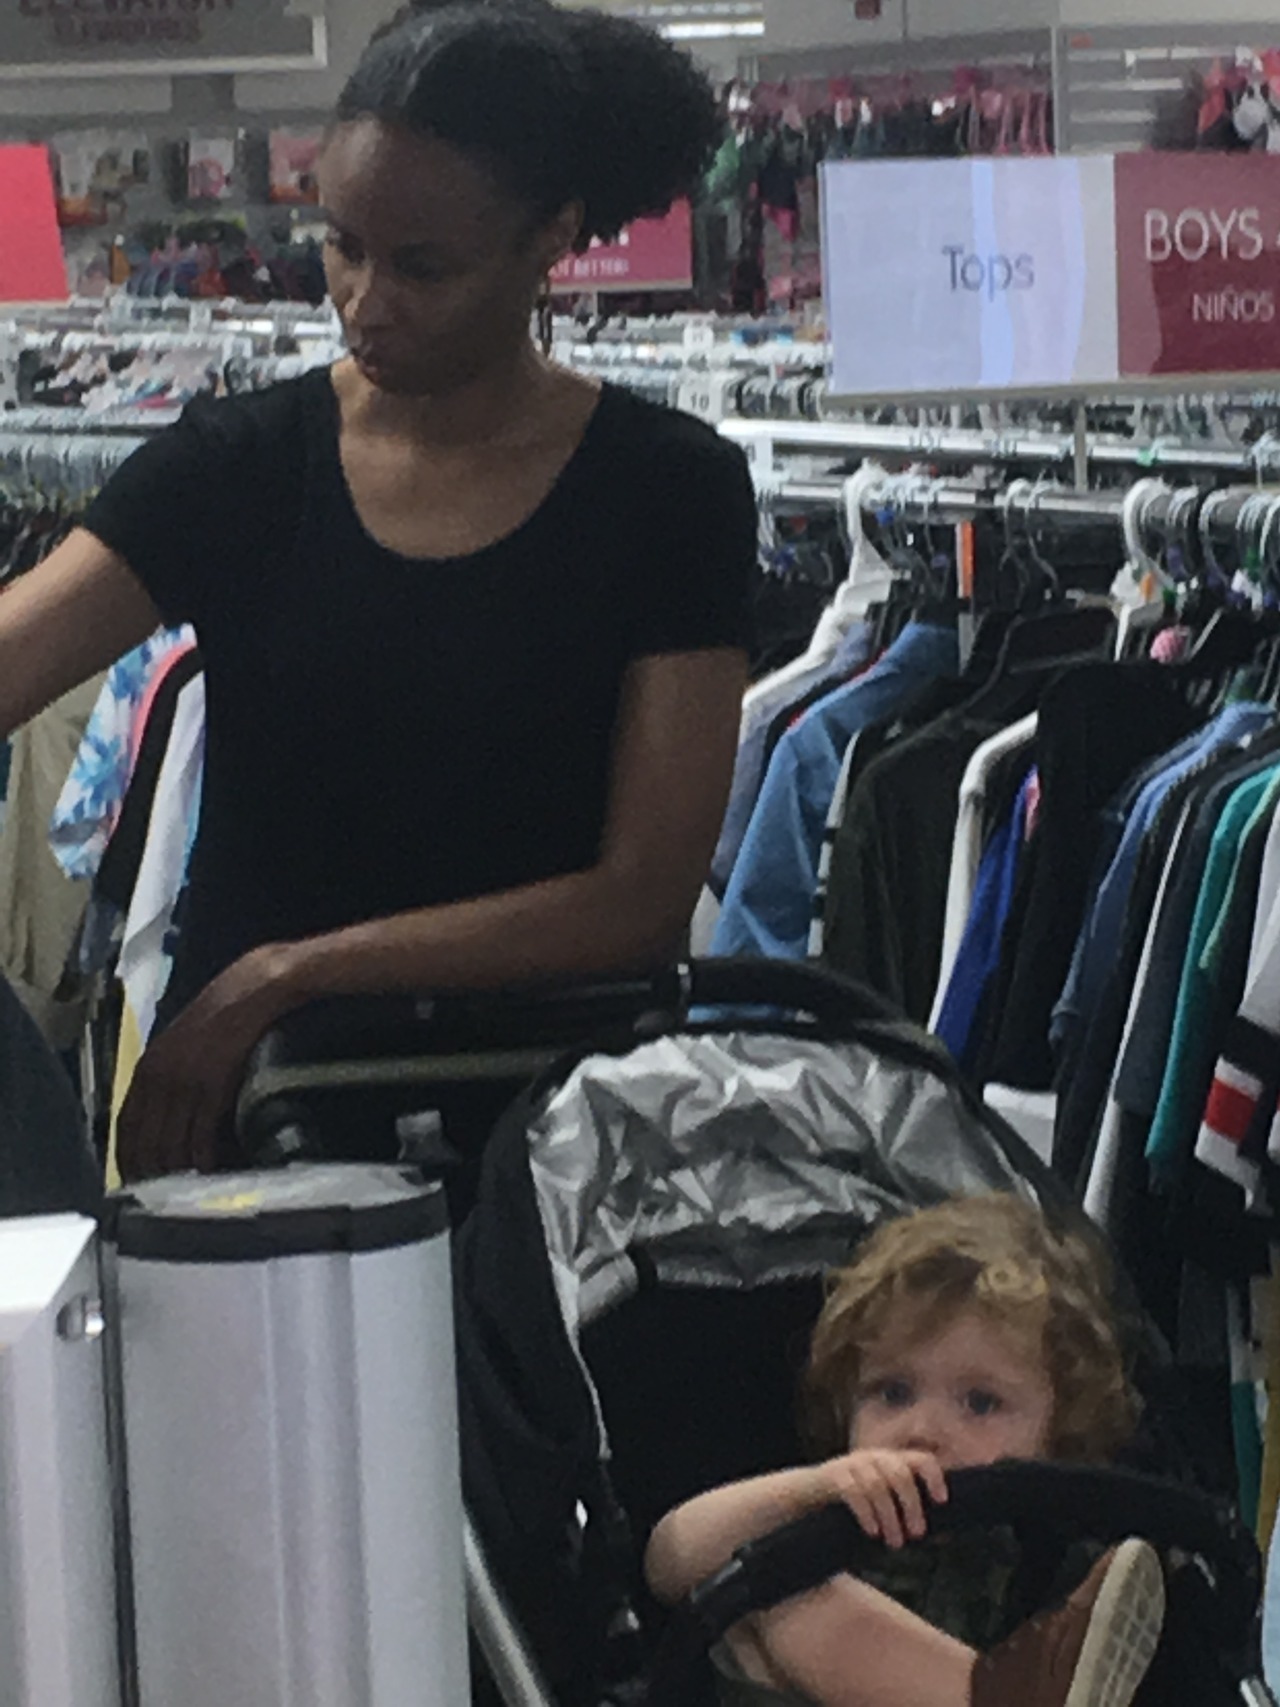 I saw this Nanny absolutely ignoring this child as he begged for milk. He wined and cried. It was heartbreaking. She never spoke a word to him nor comforted him and of course didn’t give him his milk. She continues to shop as others around her shake...